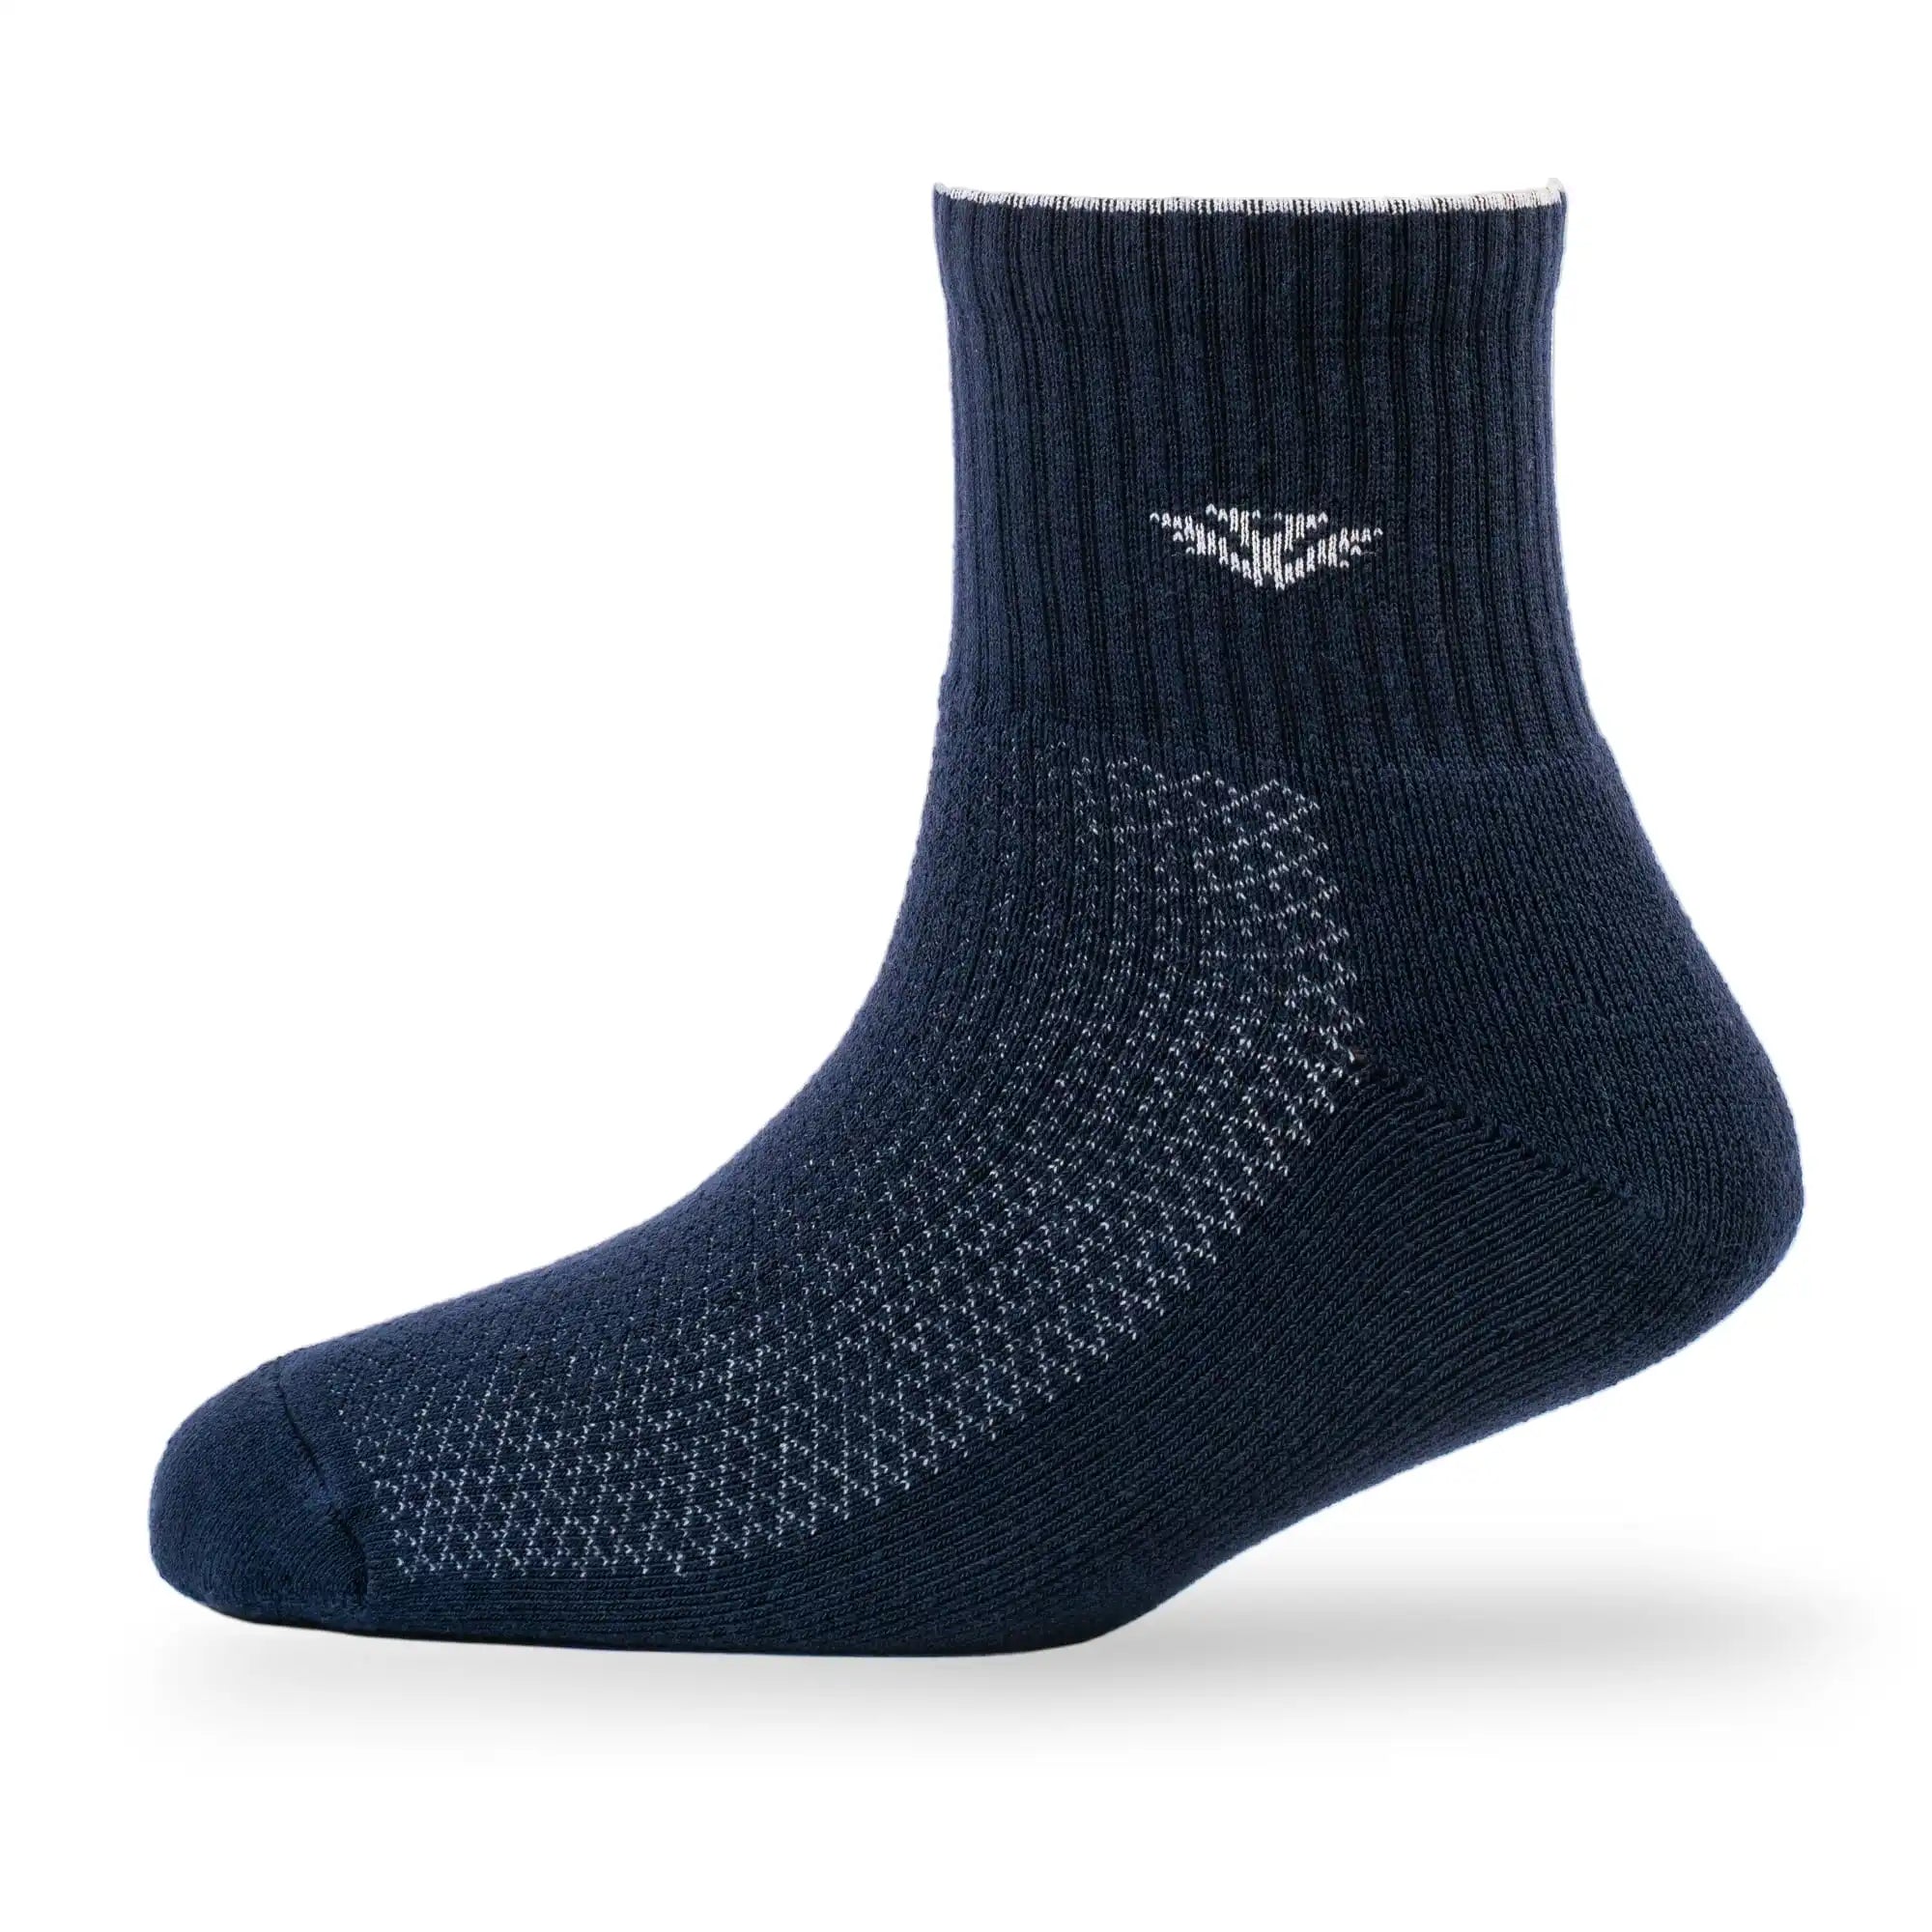 Young Wings Men's Multi Colour Cotton Fabric Design Ankle Length Socks - Pack of 3, Style no. M1-2118 N